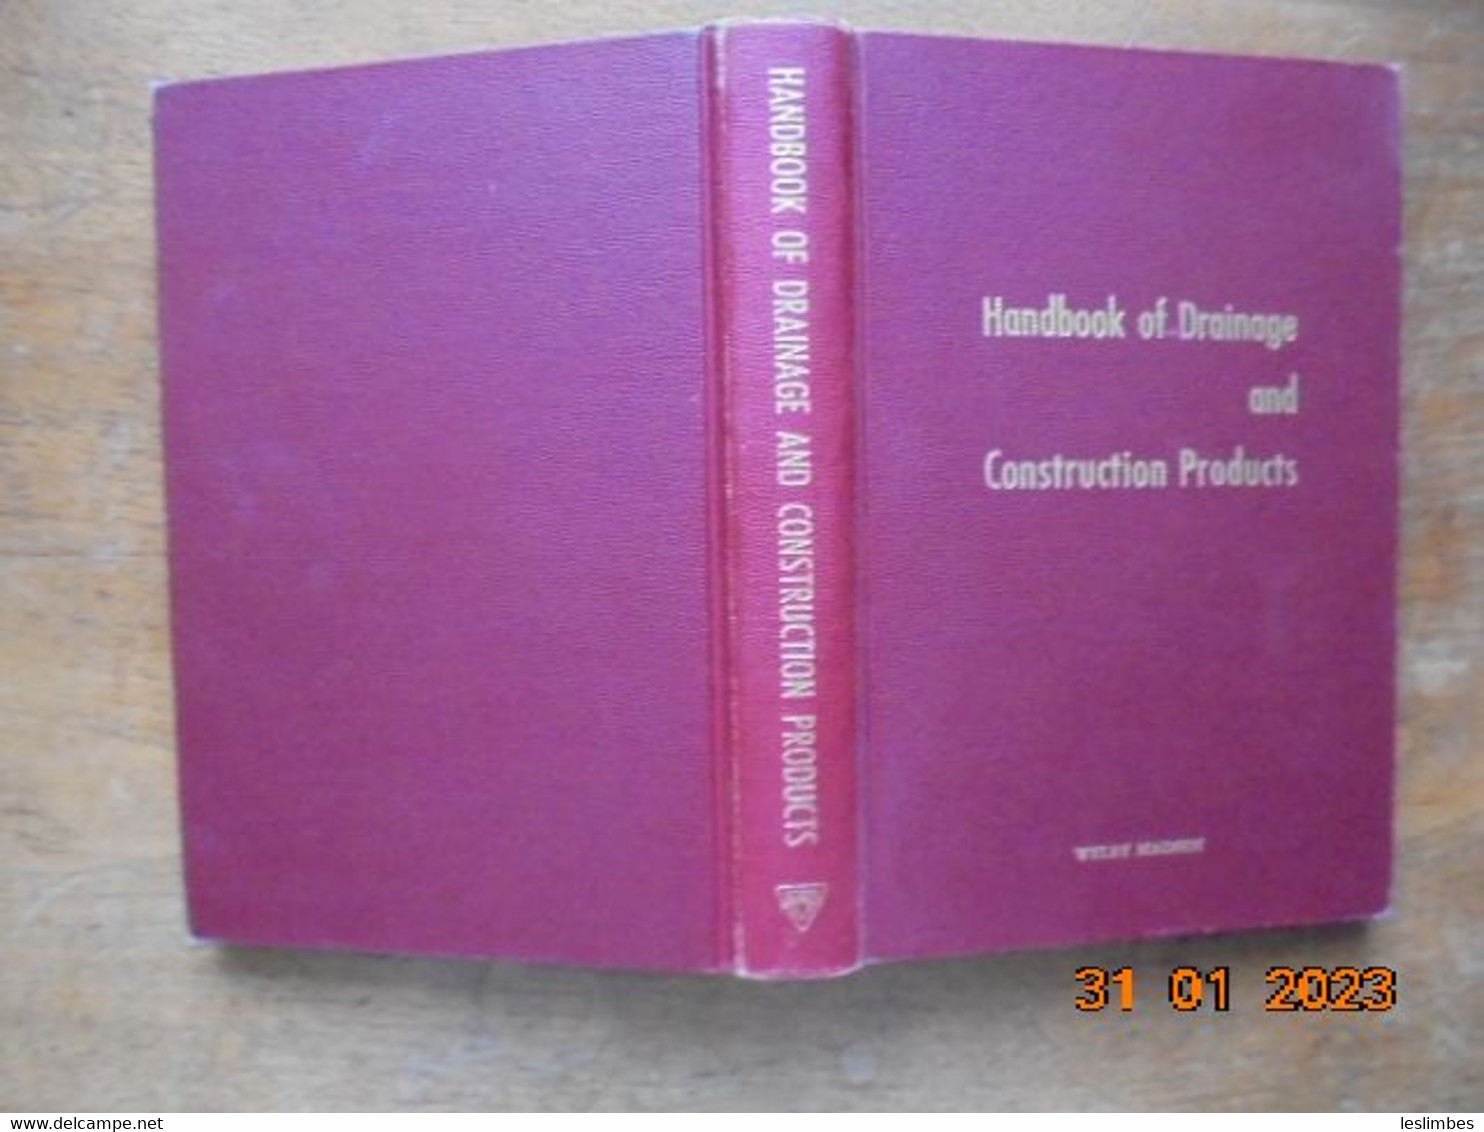 Handbook Of Drainage And Construction Products - Armco Drainage & Metal Products 1955 - Engineering